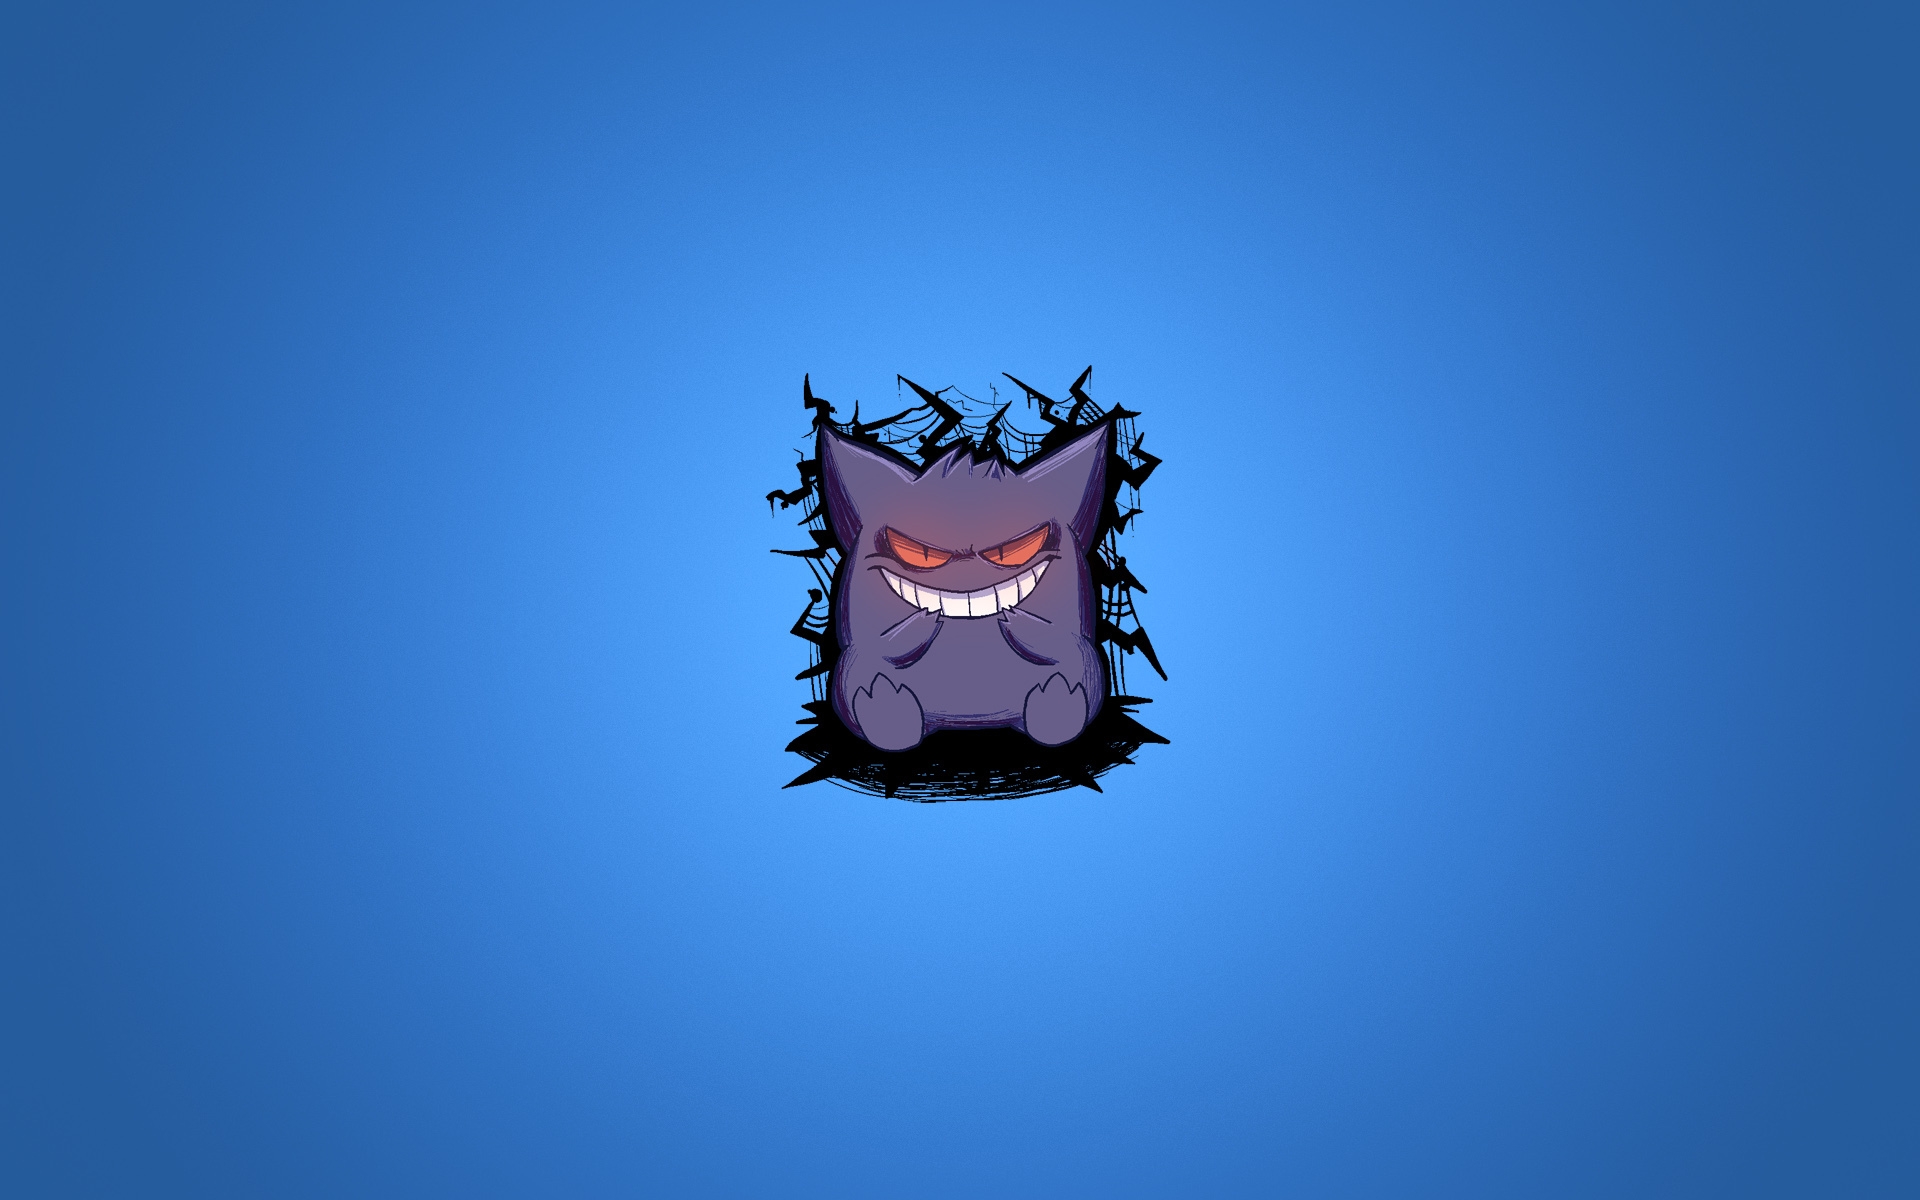 50+ Gengar (Pokémon) HD Wallpapers and Backgrounds